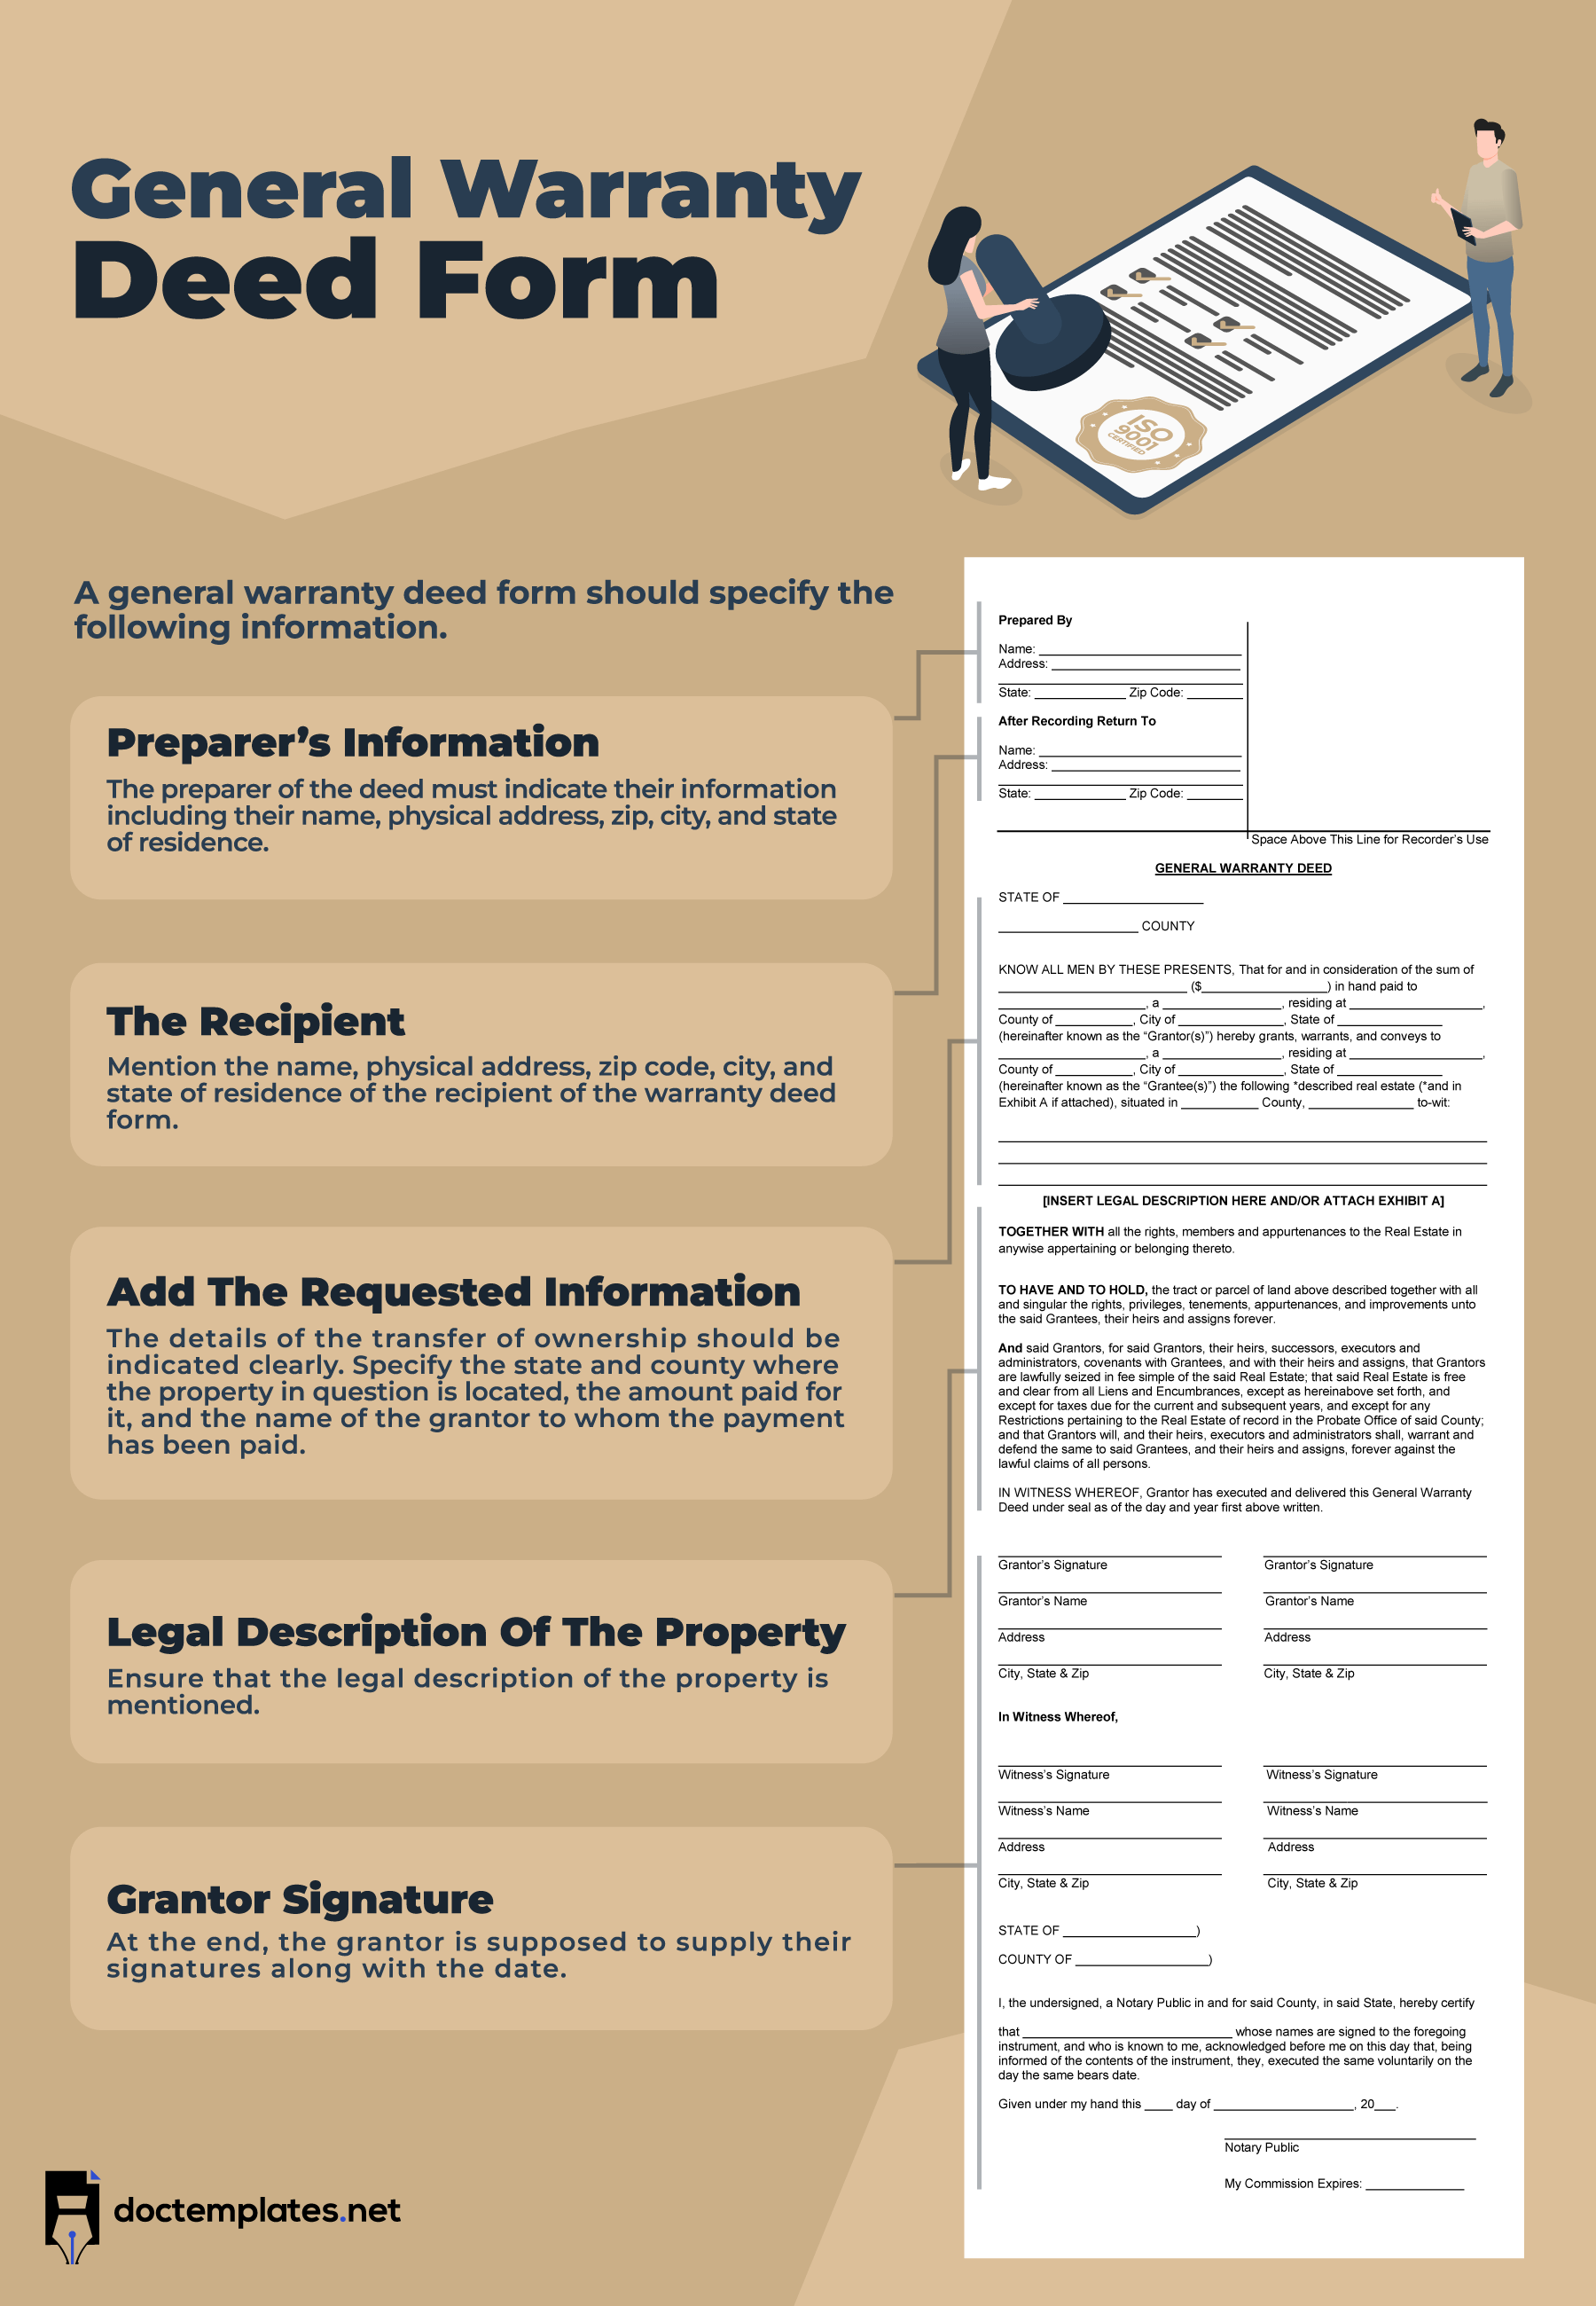 This infographic is about general warranty deed form.